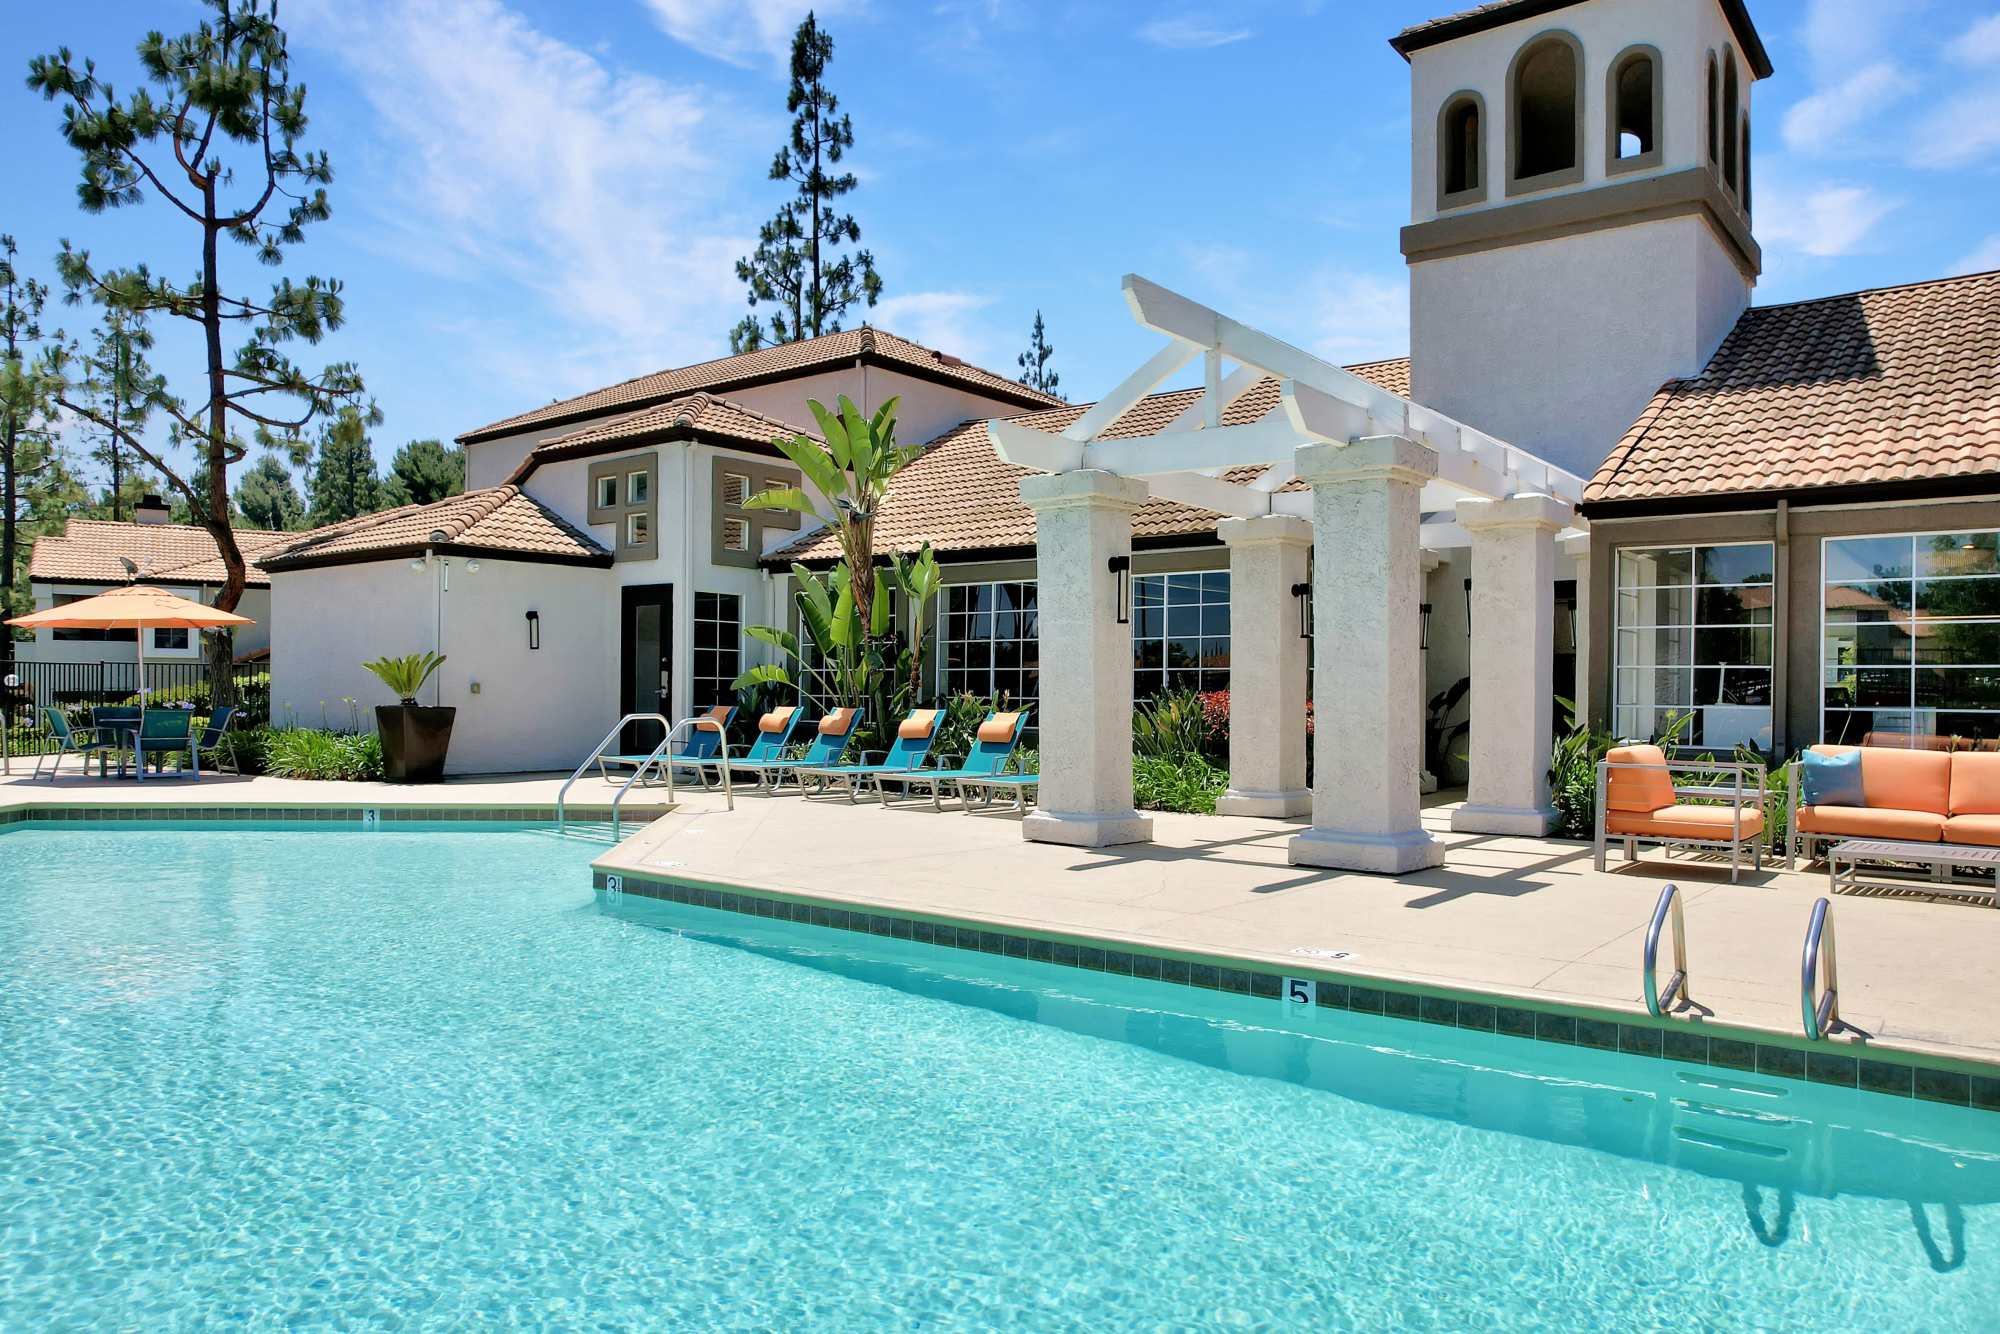 Resort-style swimming pool with lounge chairs and umbrellas at Sierra Del Oro Apartments in Corona, California